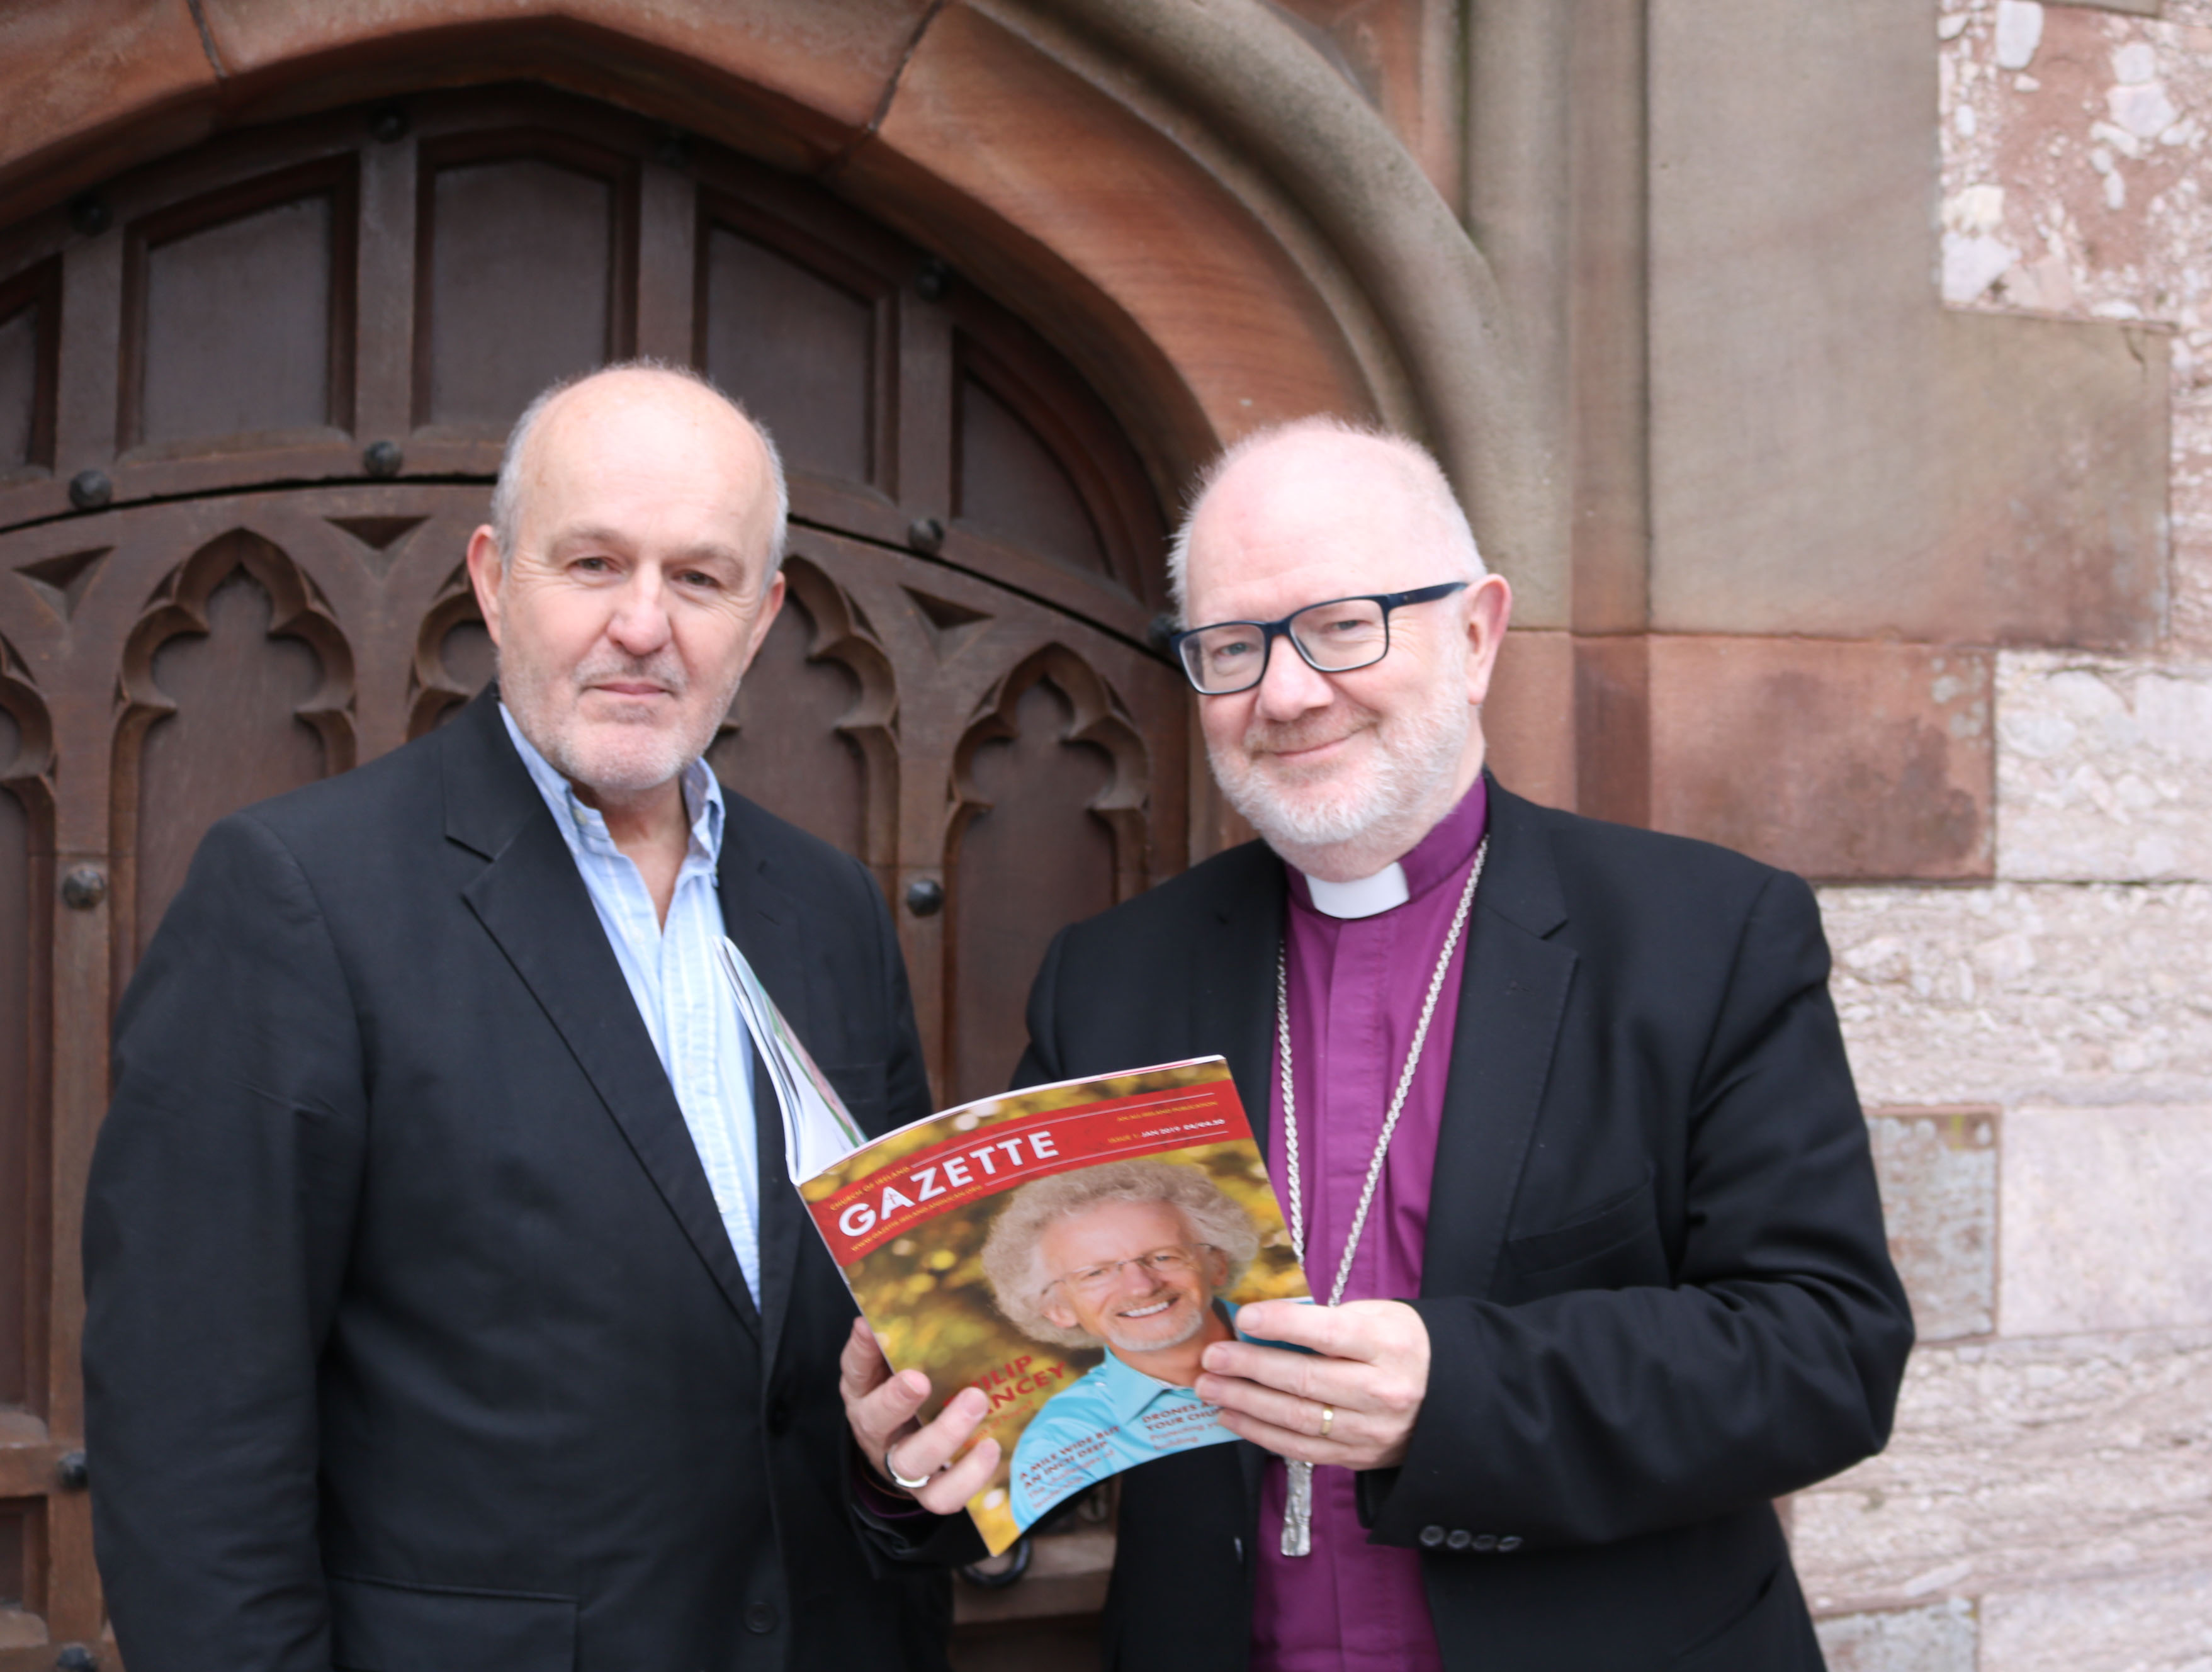 The Revd Earl Storey, editor of the Church of Ireland Gazette, and the Archbishop of Armagh, the Most Revd Dr Richard Clarke, launching the new monthly format for the Gazette at St Patrick's Cathedral, Armagh.